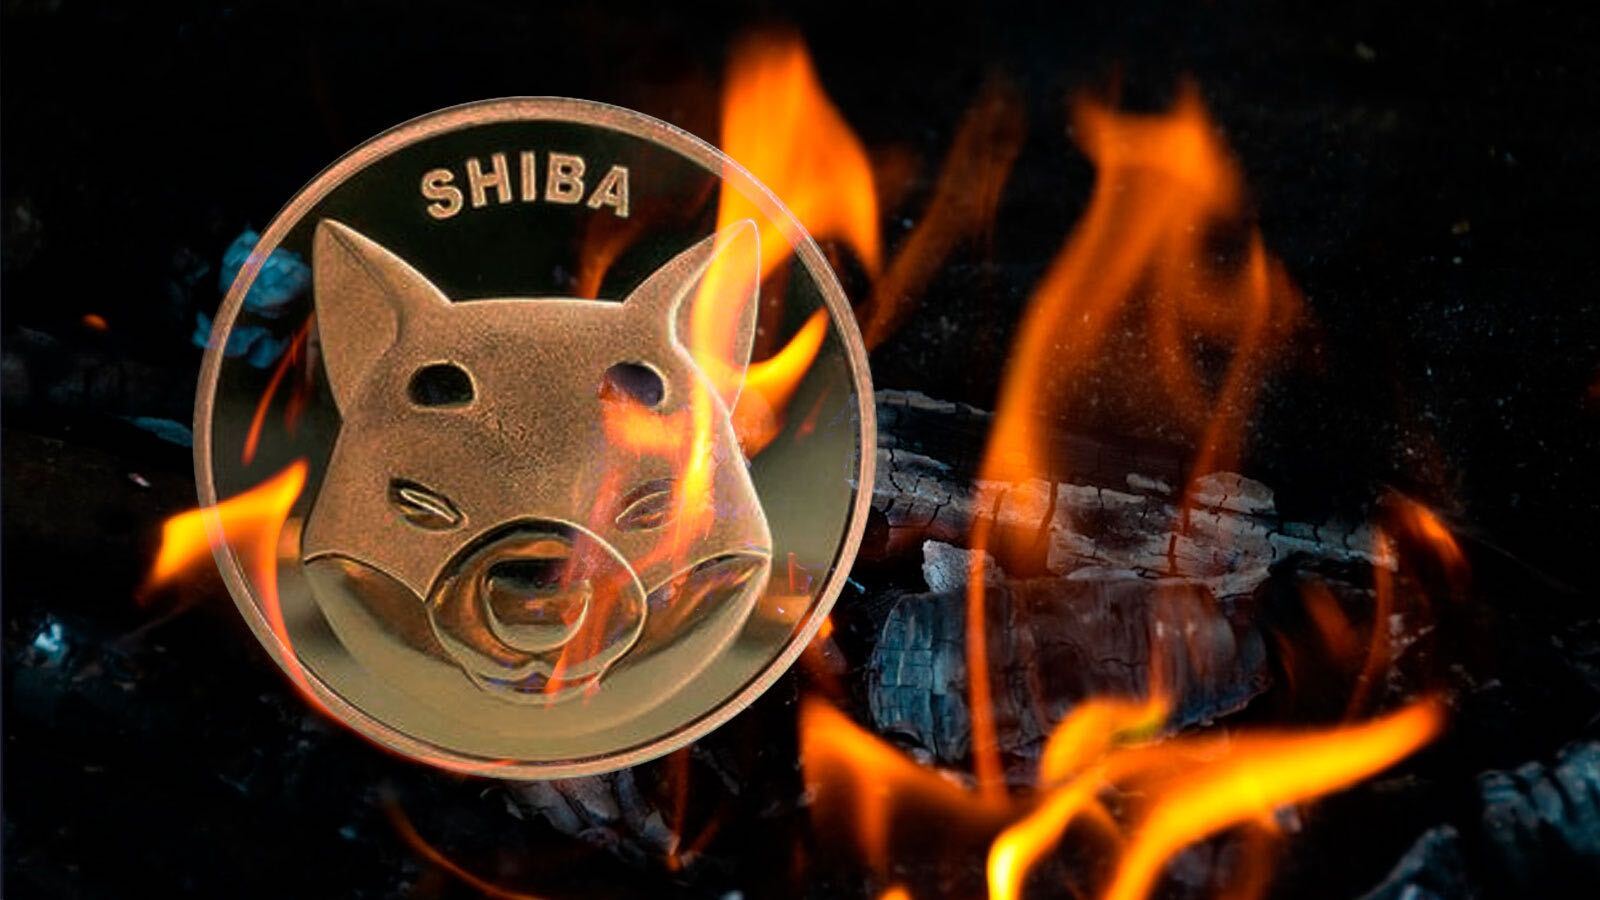 Shiba Inu Records 3,6 Billion SHIB Burned In August with Only 59% Of Initial Supply Left